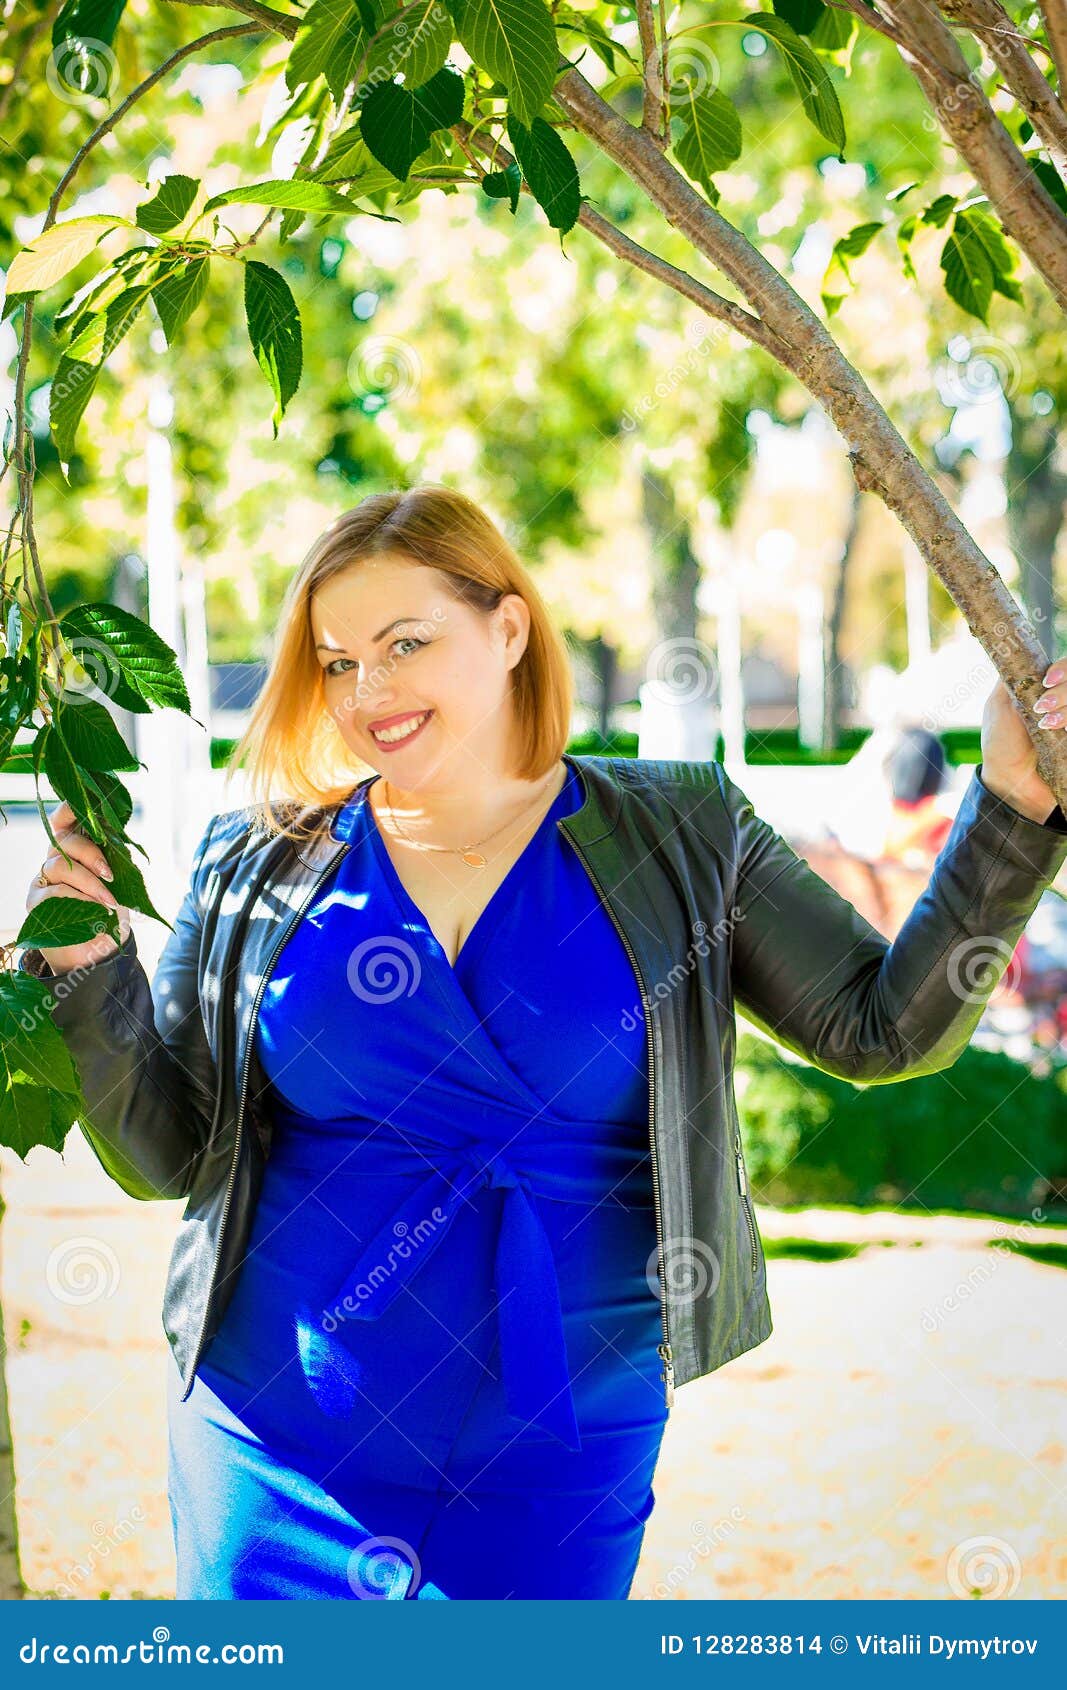 Plus size woman making sport and fitness. Studio portraits with curvy girl  Stock Photo - Alamy